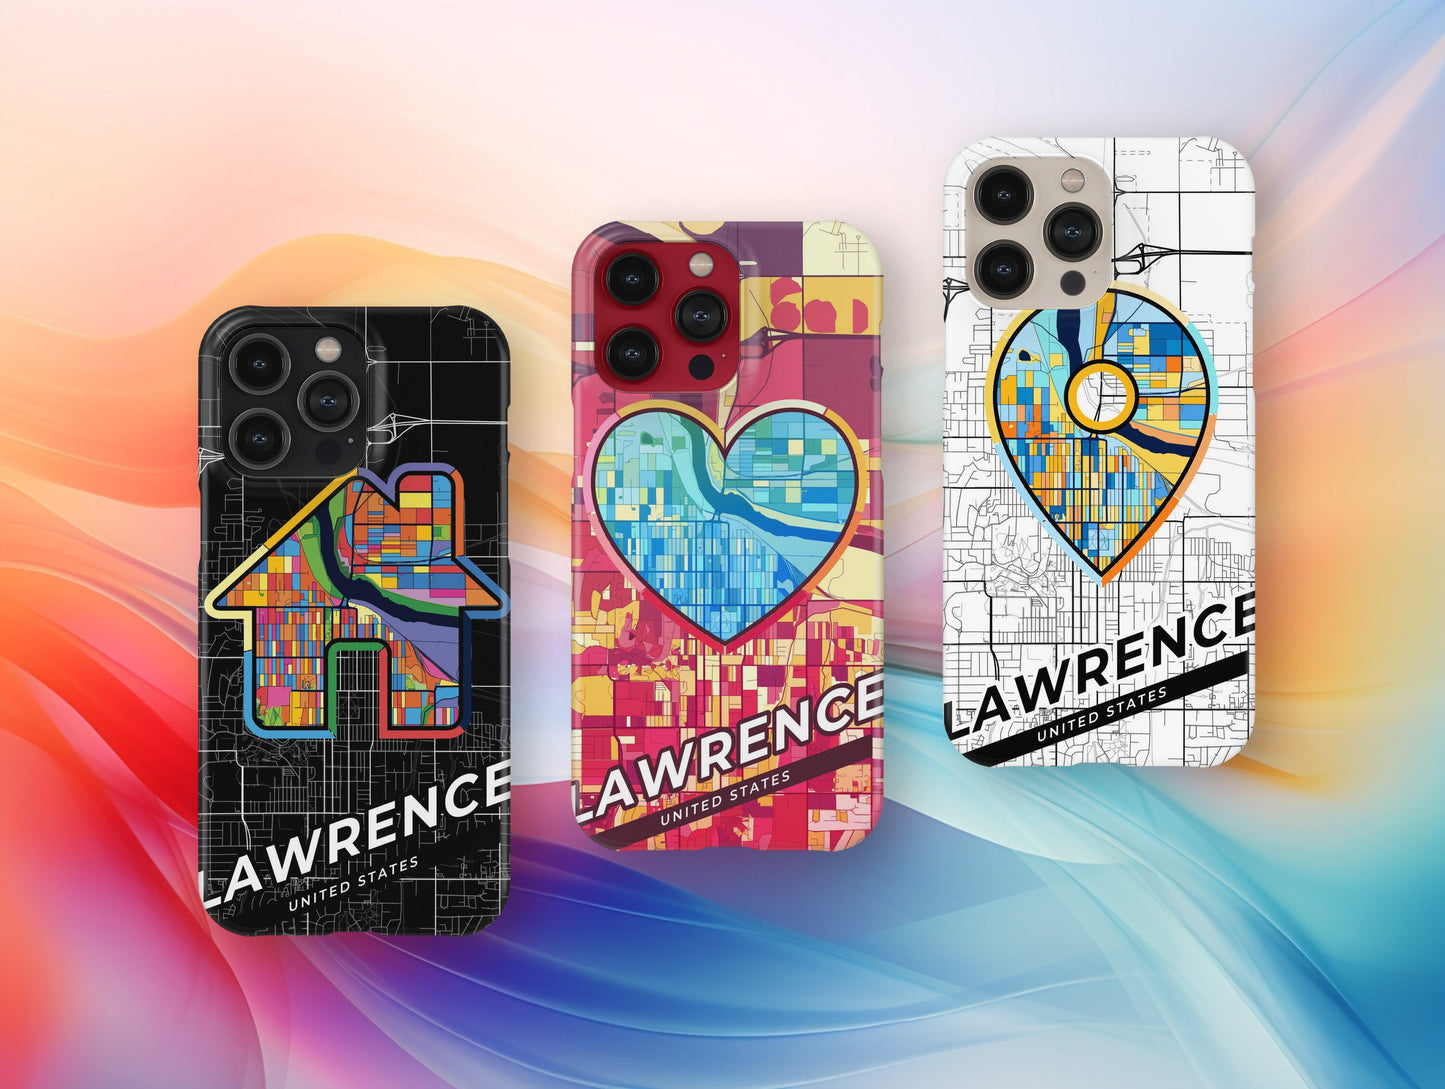 Lawrence Kansas slim phone case with colorful icon. Birthday, wedding or housewarming gift. Couple match cases.